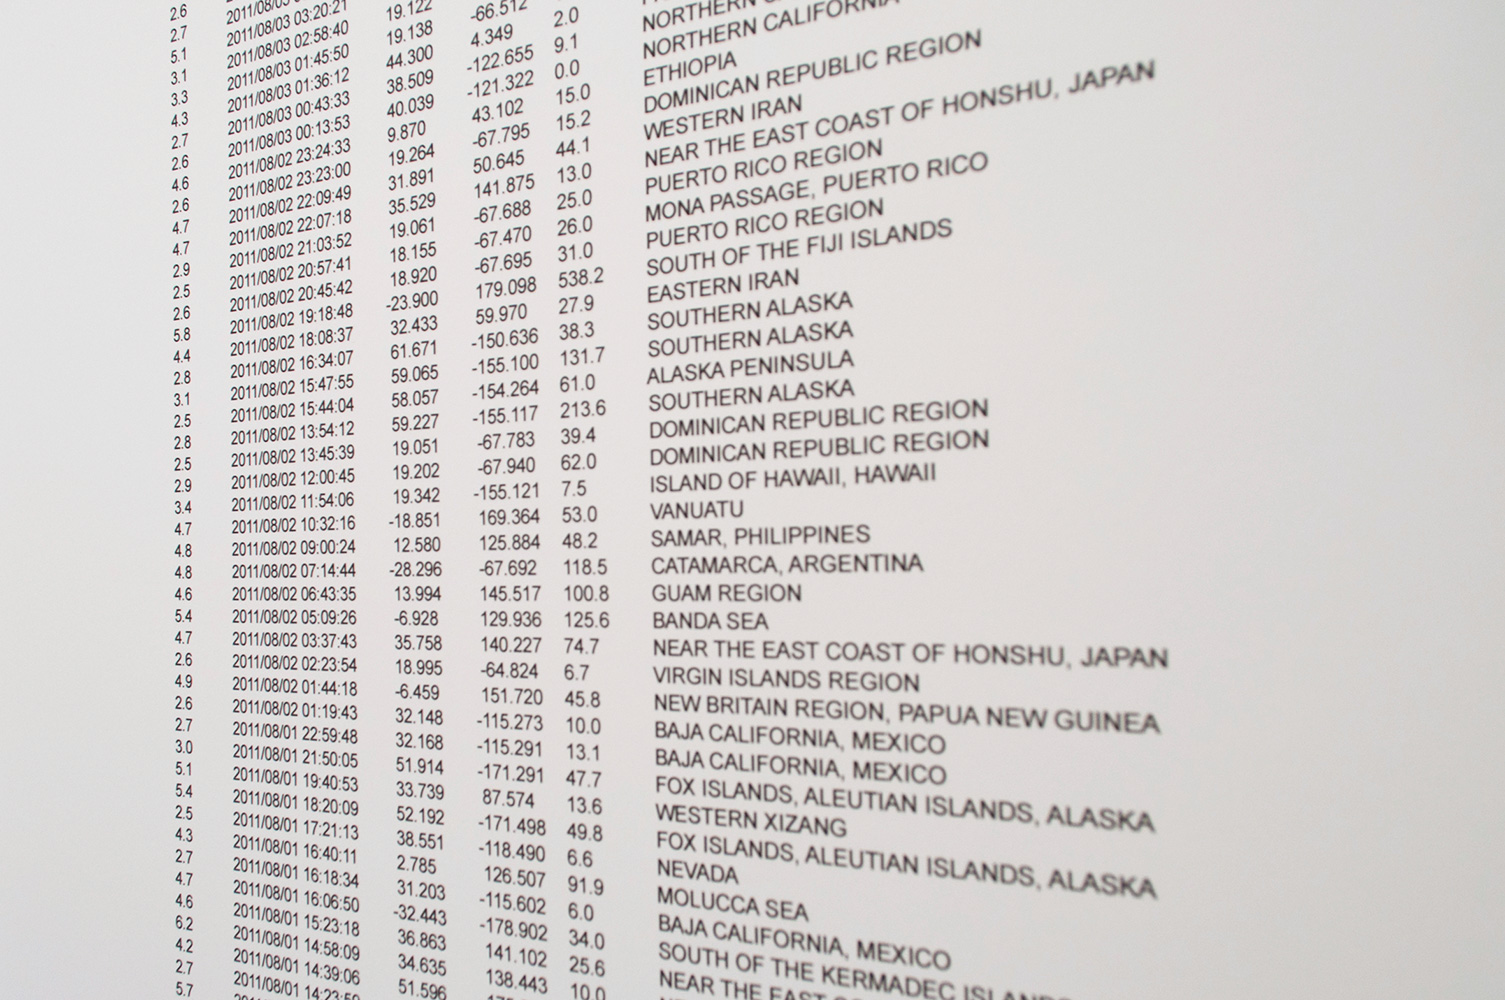    Latest Earthquakes in the World - Past 7 days     2011  inkjet print&nbsp; 43 x 170 cm 